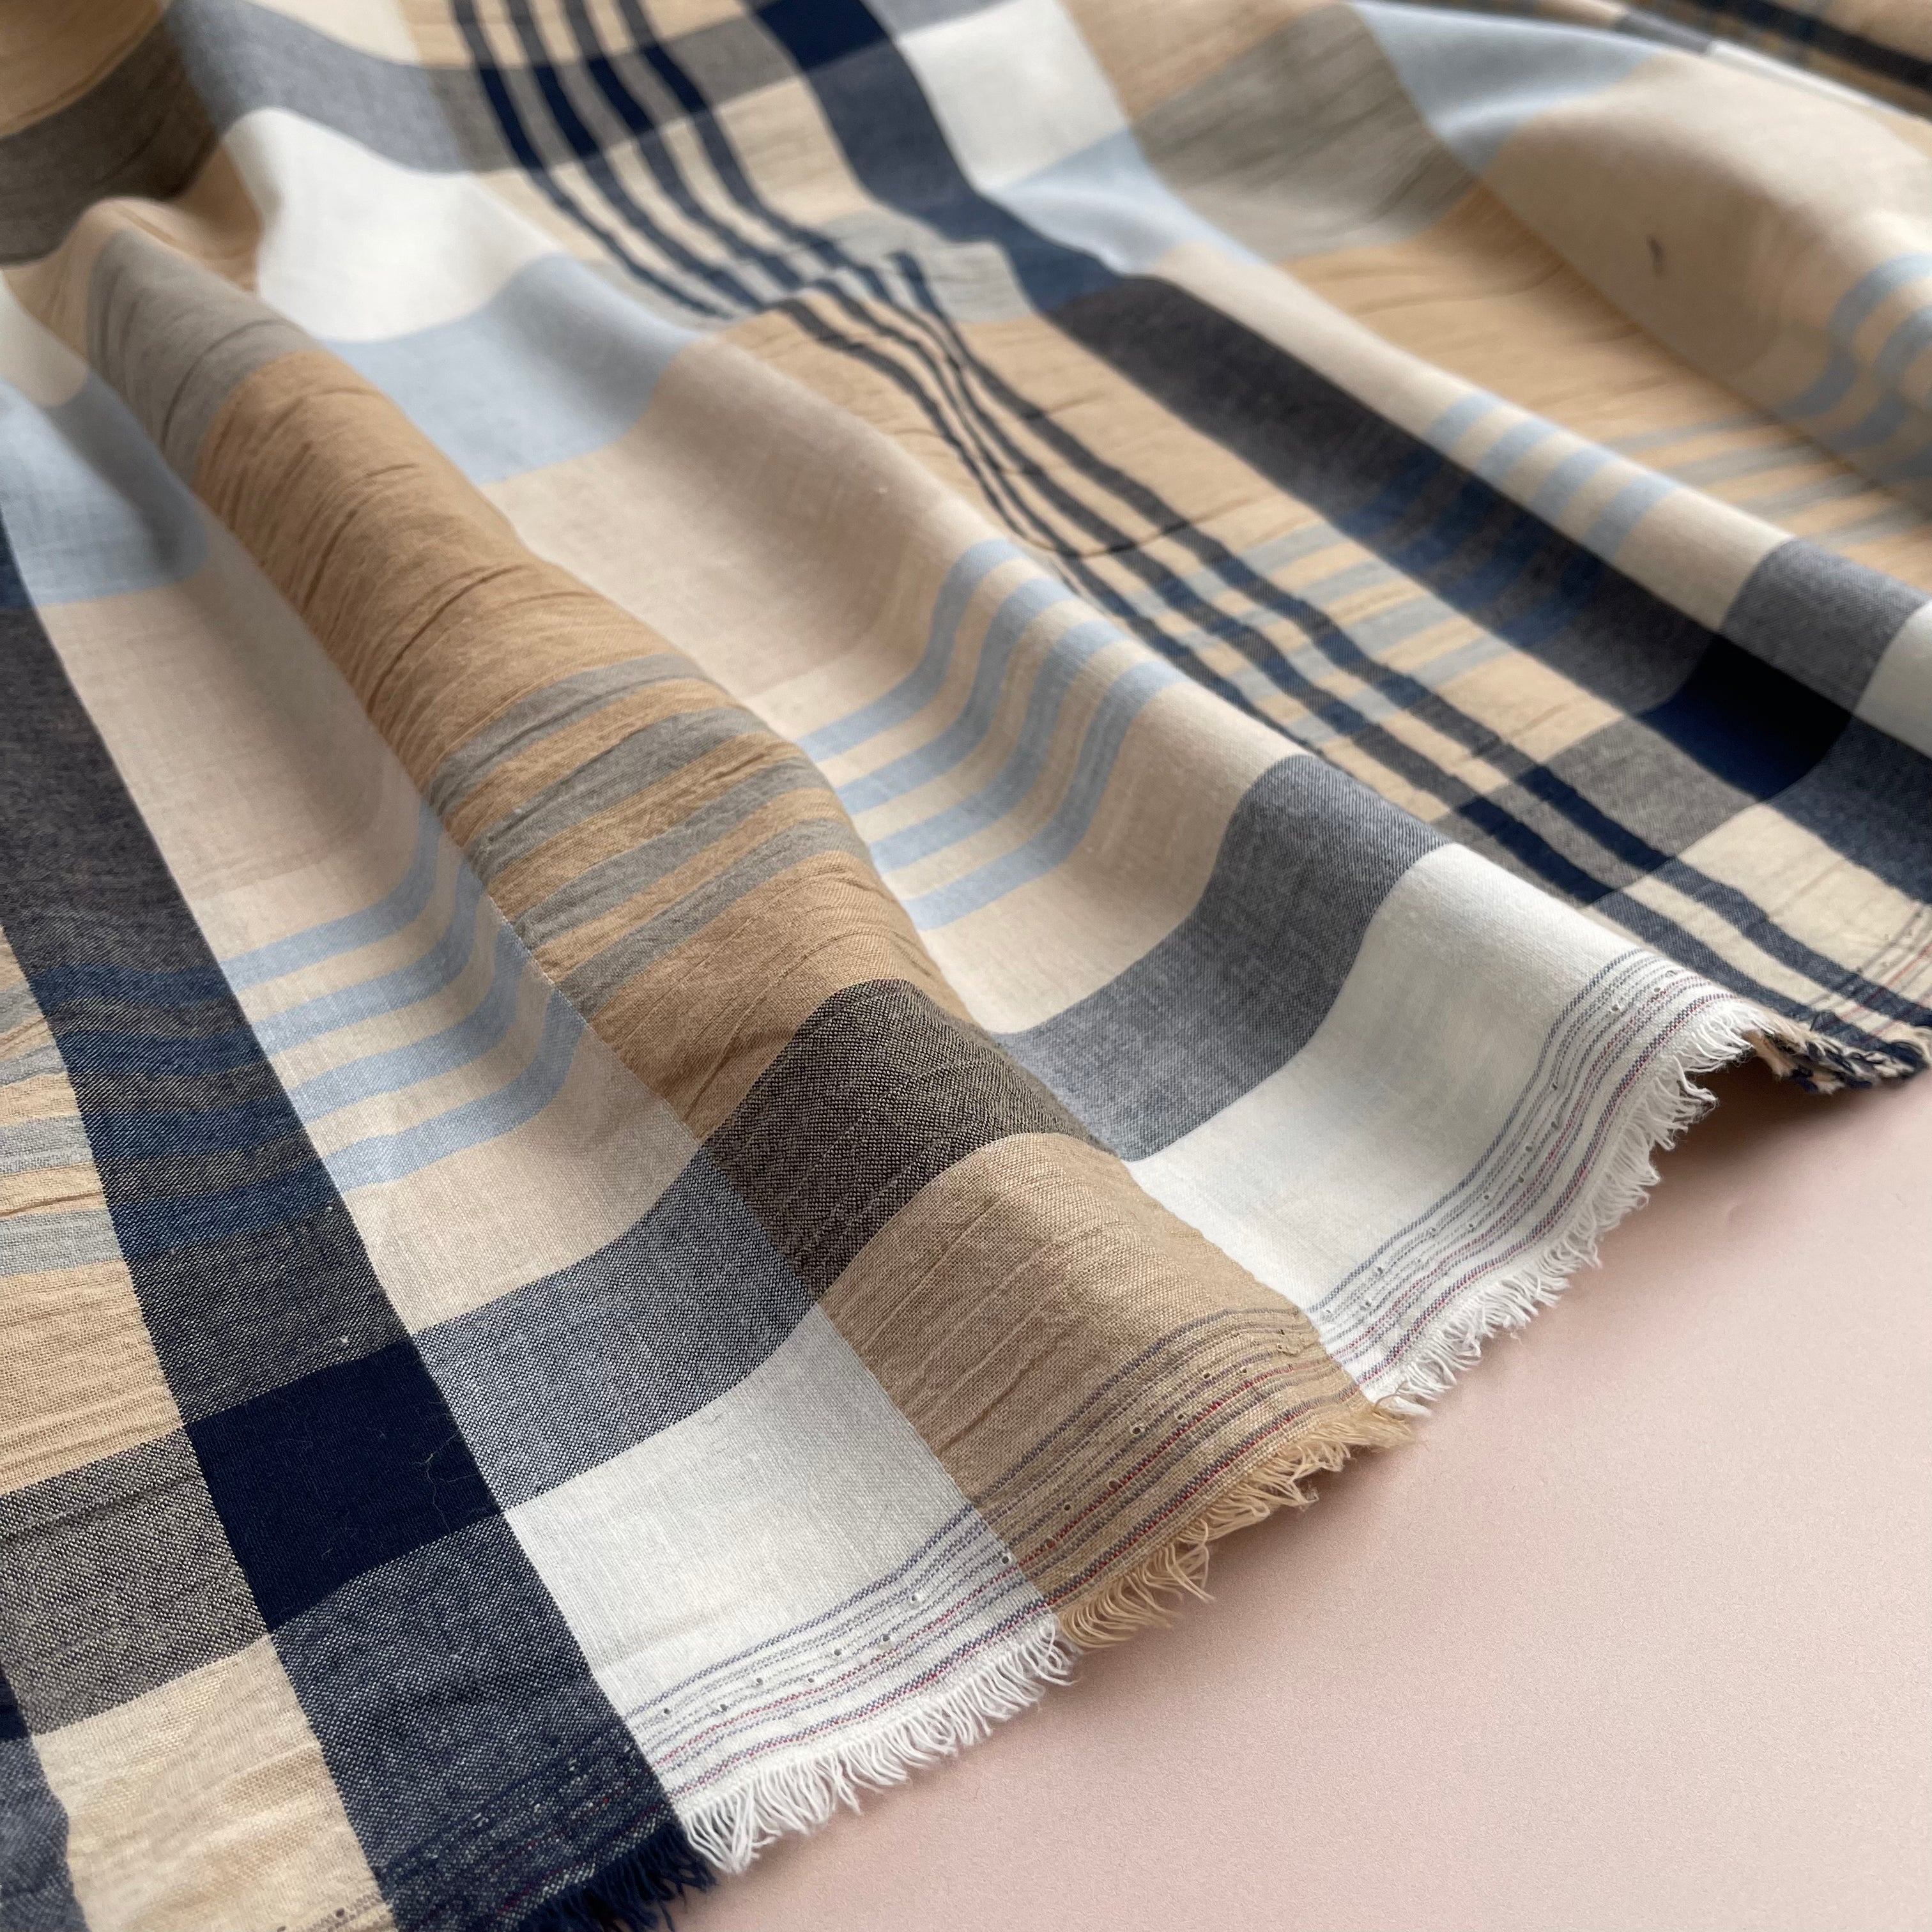 Yarn Dyed Checks in Blue and Beige Stretch Cotton Fabric